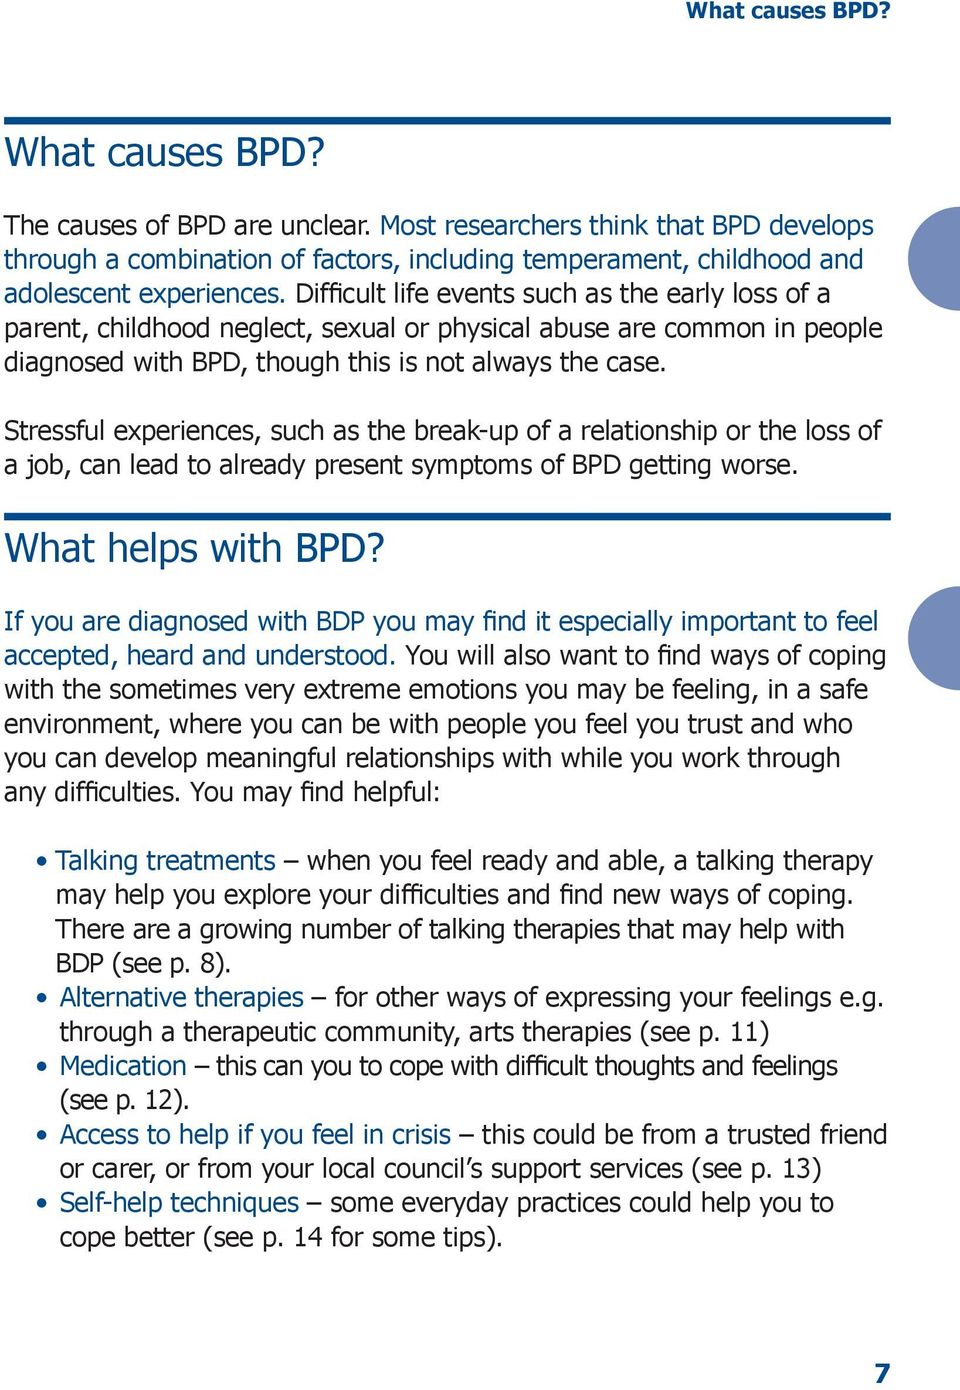 Stressful experiences, such as the break-up of a relationship or the loss of a job, can lead to already present symptoms of BPD getting worse. What helps with BPD?